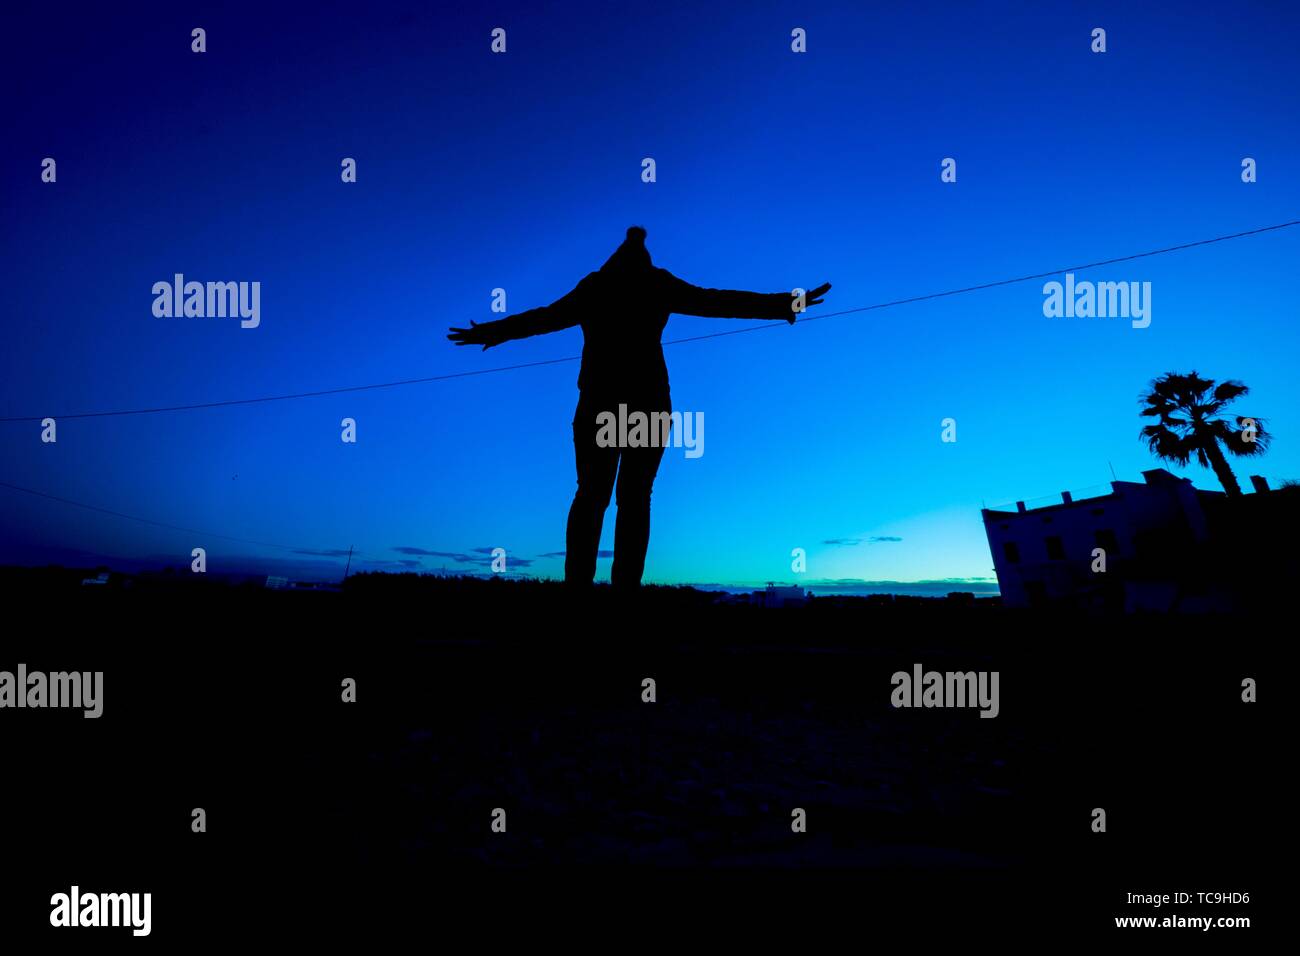 Silhouette of a girl with open arms against blue sunset sky. Valencia, Spain Stock Photo